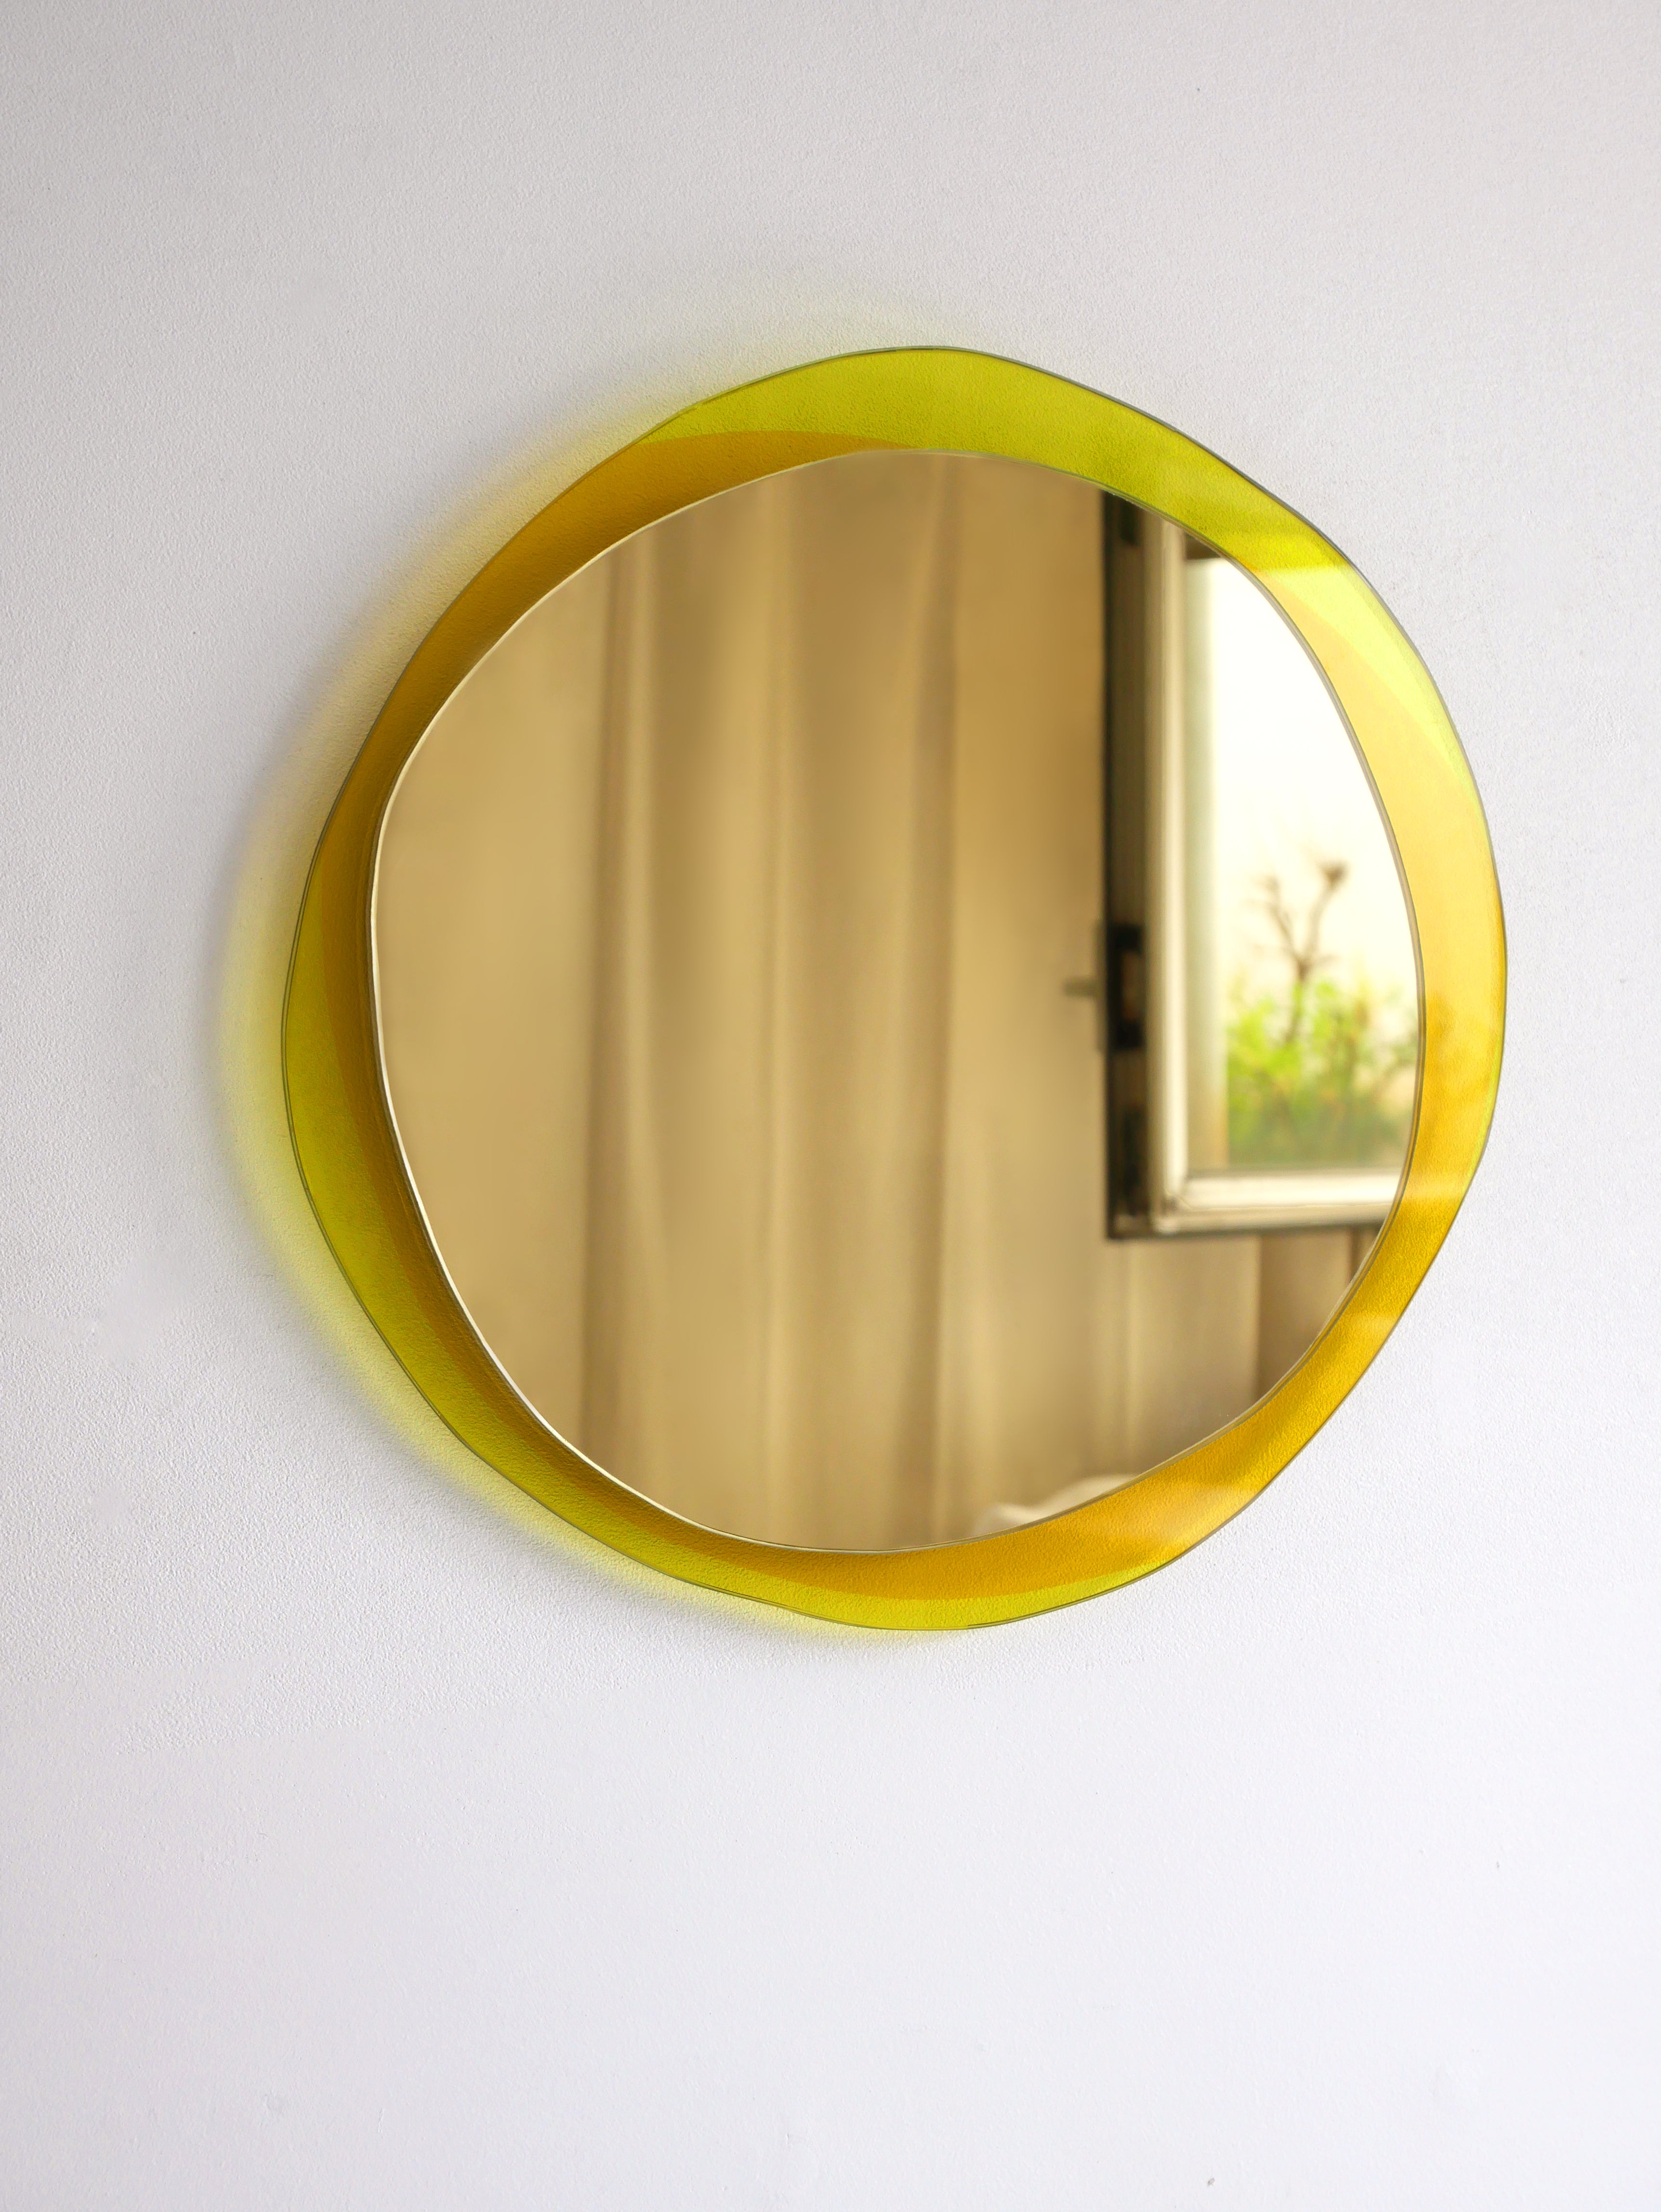 Solar large hand-sculpted mirror, Laurene Guarneri
Limited edition.
Handmade.
Materials: Gold colored mirror, gold and orange colored laminated glass.
Dimensions: 100 x 100 cm

Laurène Guarneri is a designer based in Paris.
Graduated in master's